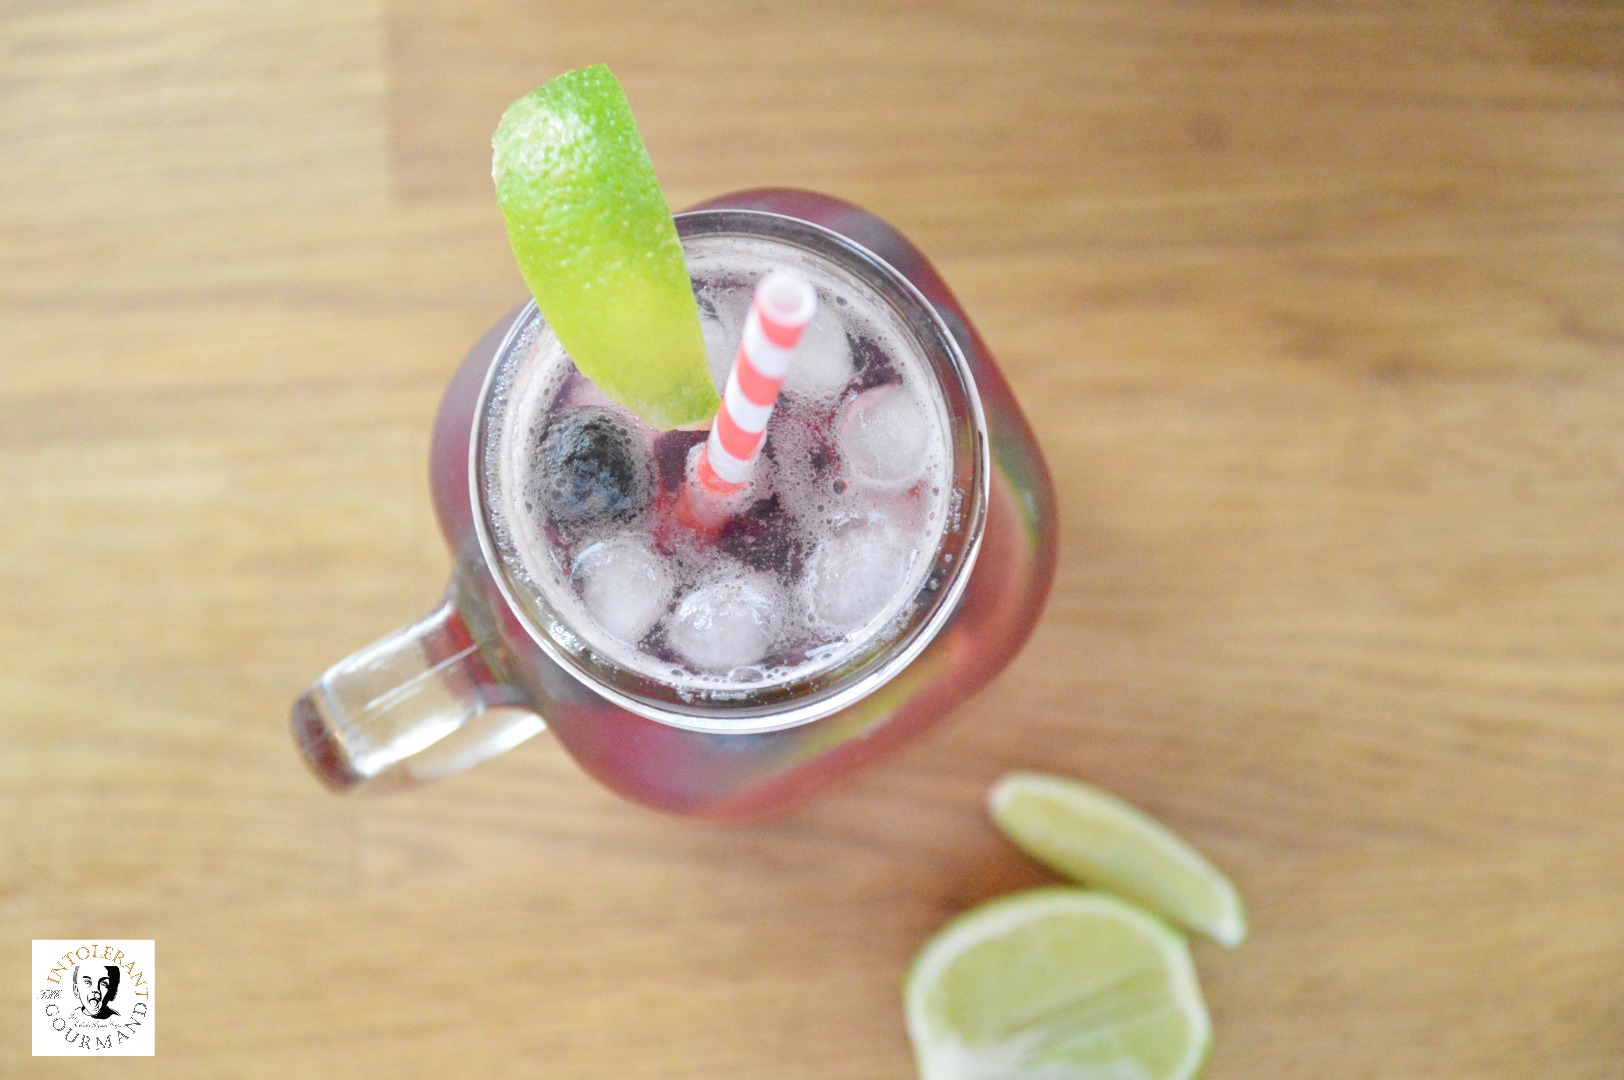 The ultimate G&T - Cranberry, Blueberry & Lime